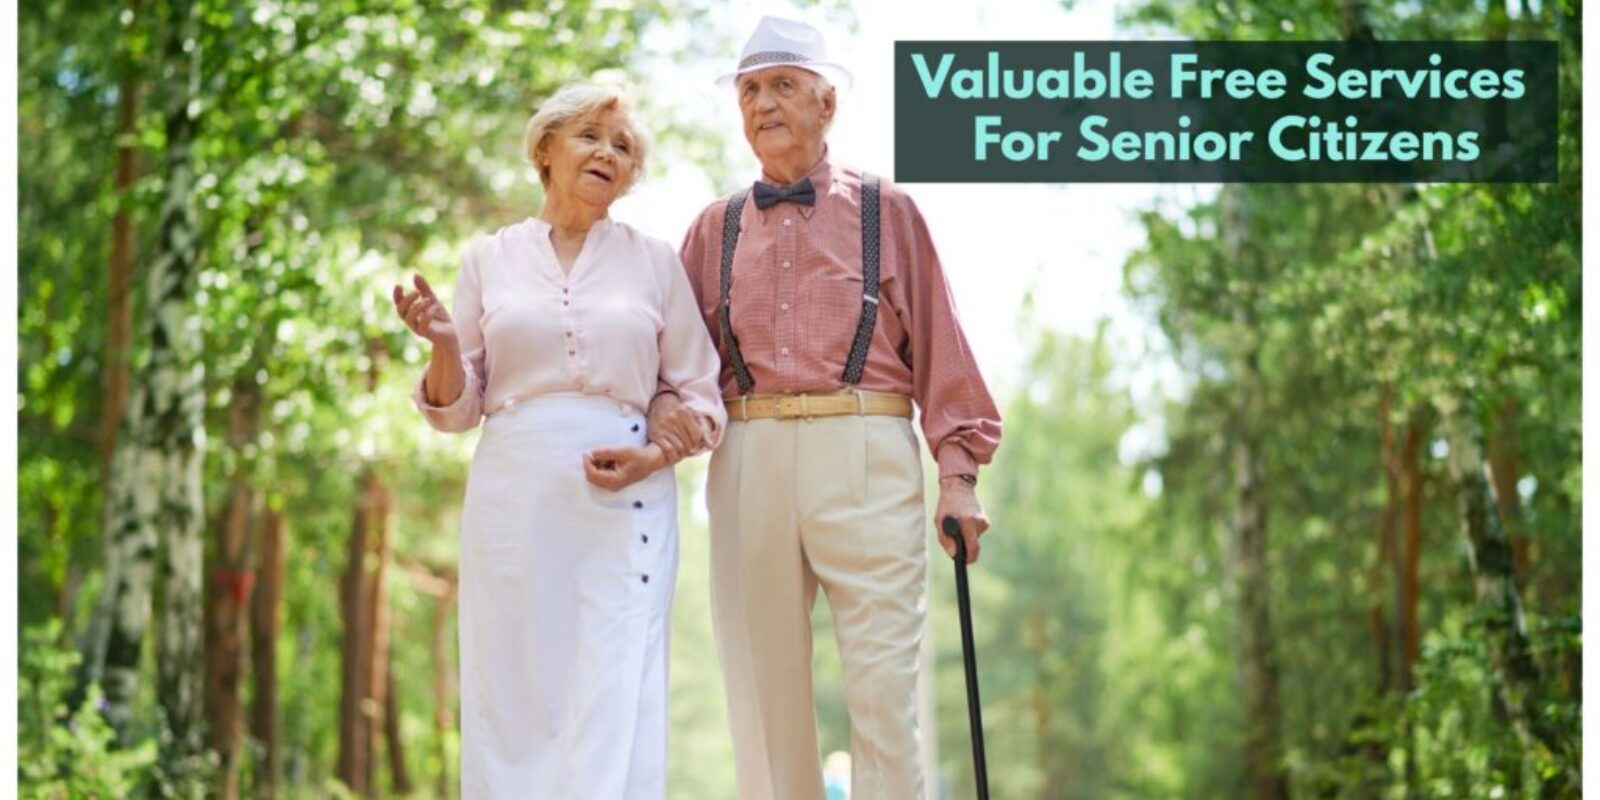 Valuable Free Services for Senior Citizens